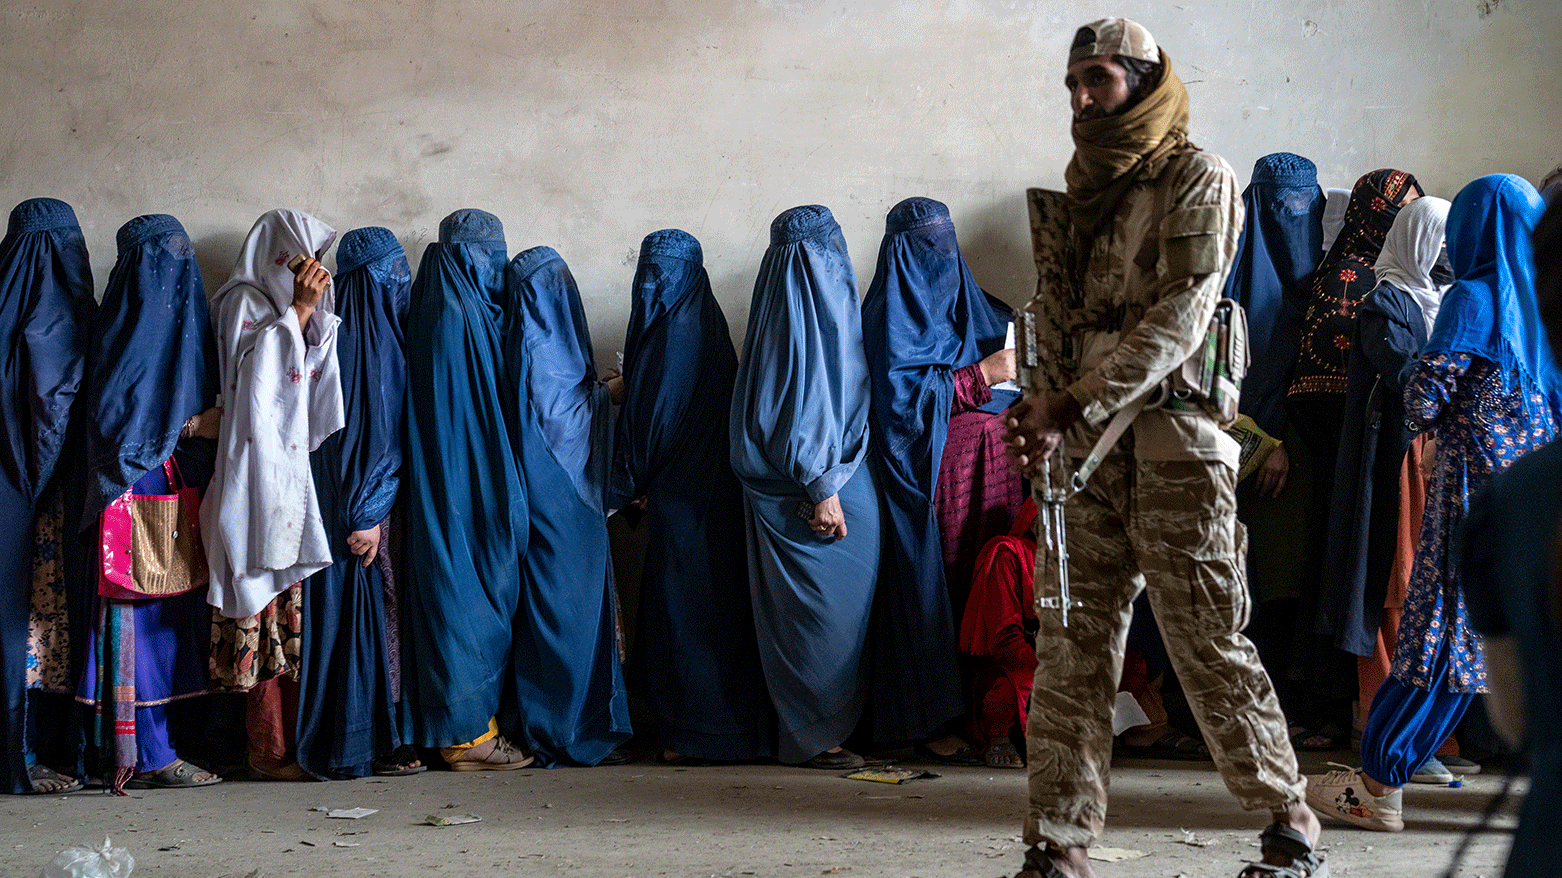 A Taliban fighter stands guard as women wait to receive food rations distributed by a humanitarian aid group, in Kabul, Afghanistan, on May 23, 2023. (Photo: AP)